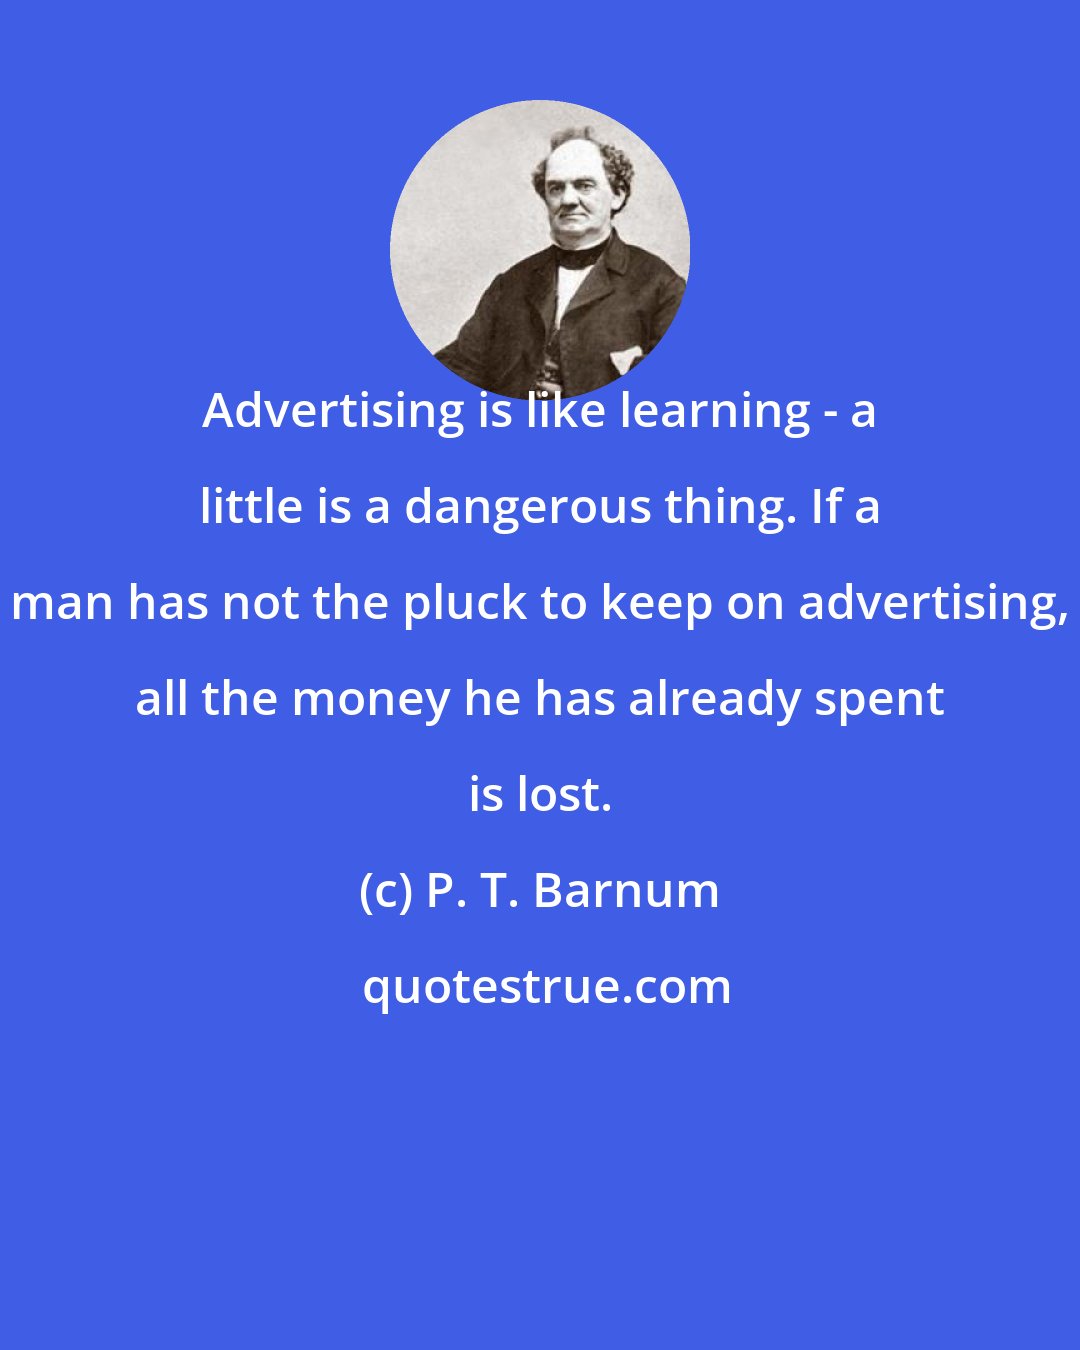 P. T. Barnum: Advertising is like learning - a little is a dangerous thing. If a man has not the pluck to keep on advertising, all the money he has already spent is lost.